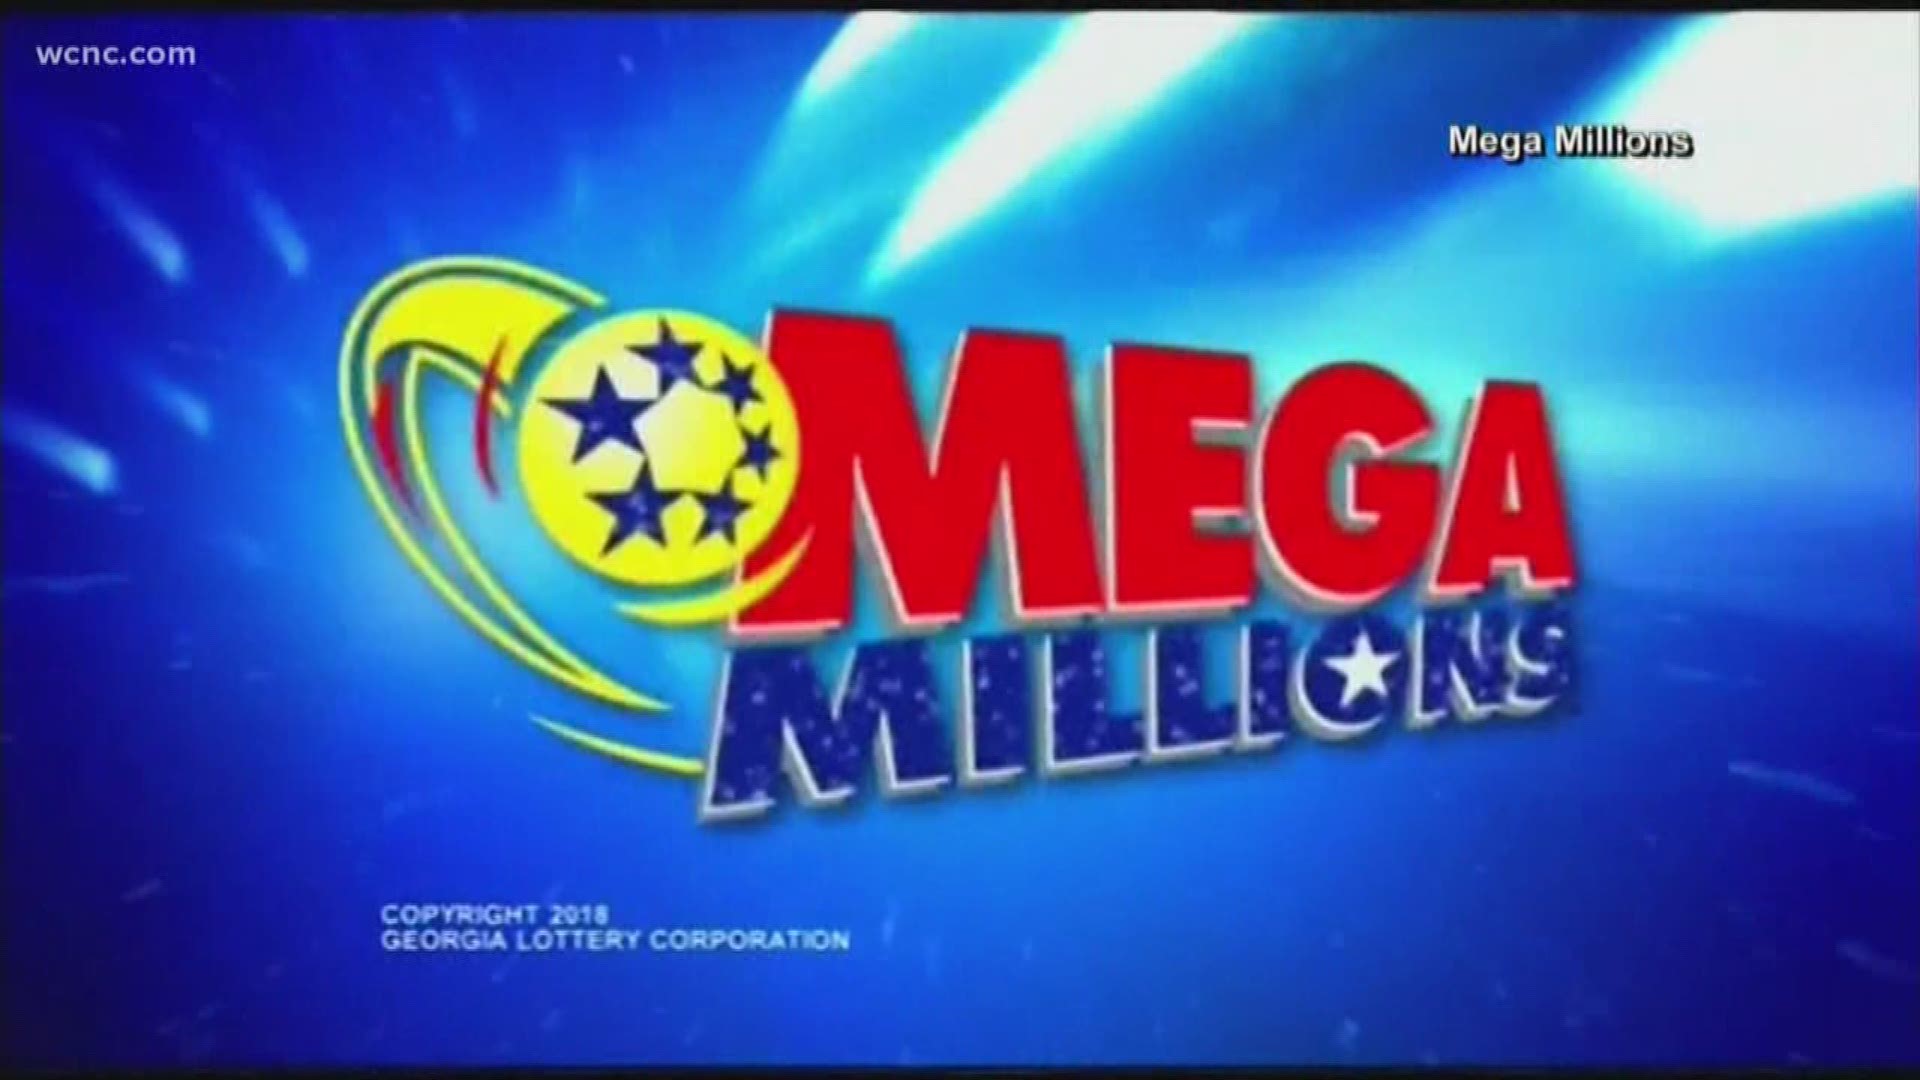 The largest Mega Millions jackpot is up for grabs and if there is a winner Tuesday night they'll be taking home $667 million dollars before taxes.